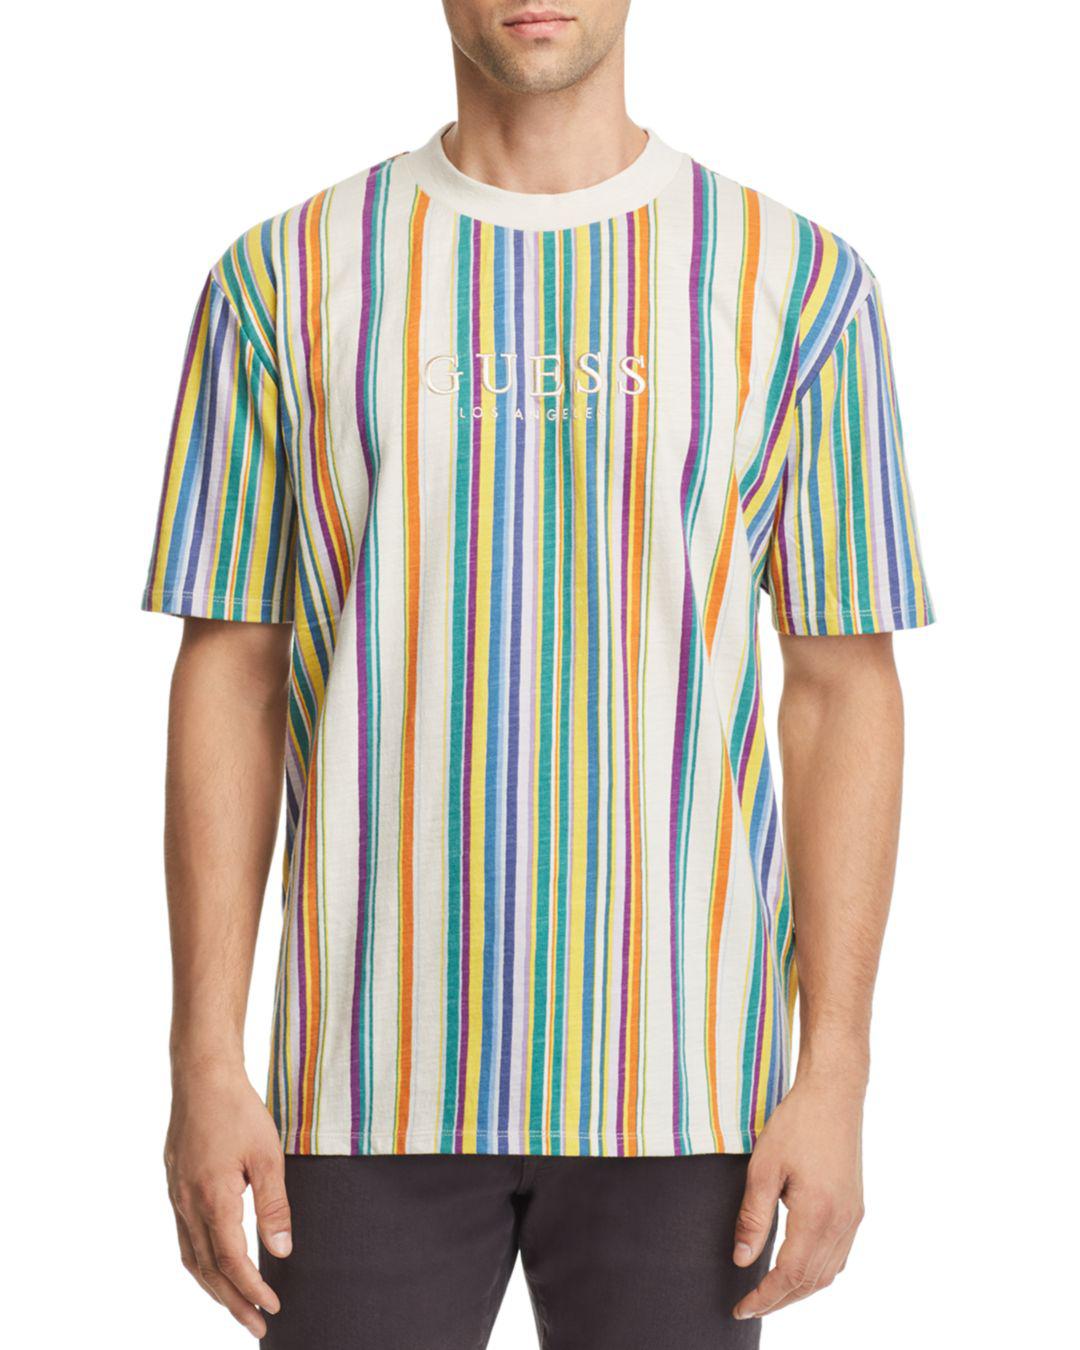 Guess Riviera Striped Tee in Blue for Men - Lyst